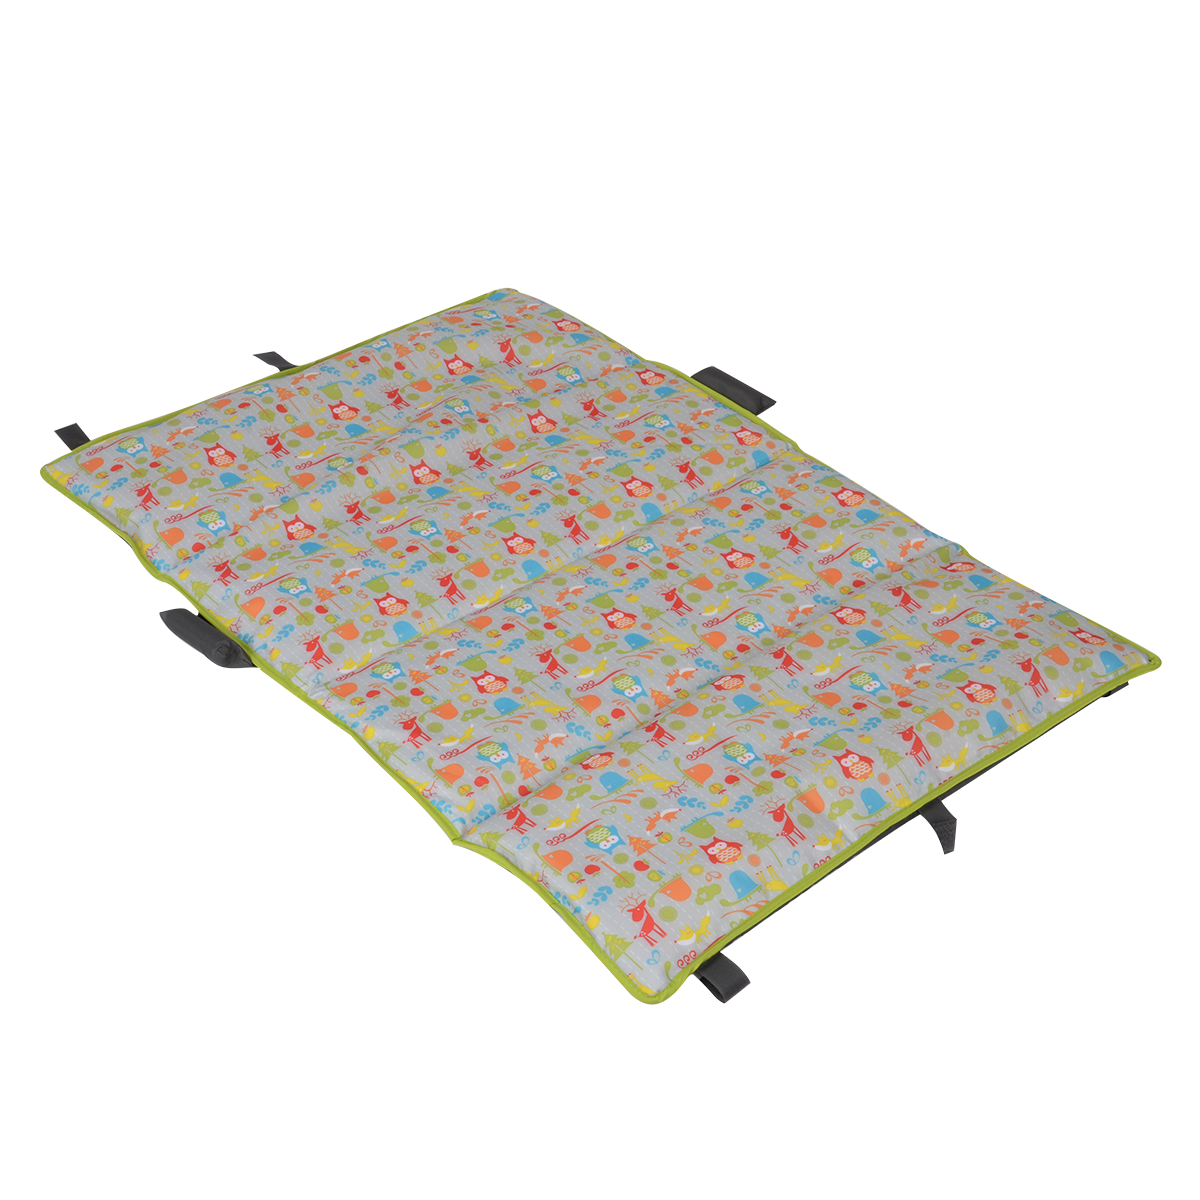 BabySuite Basic Play Yards Replacement